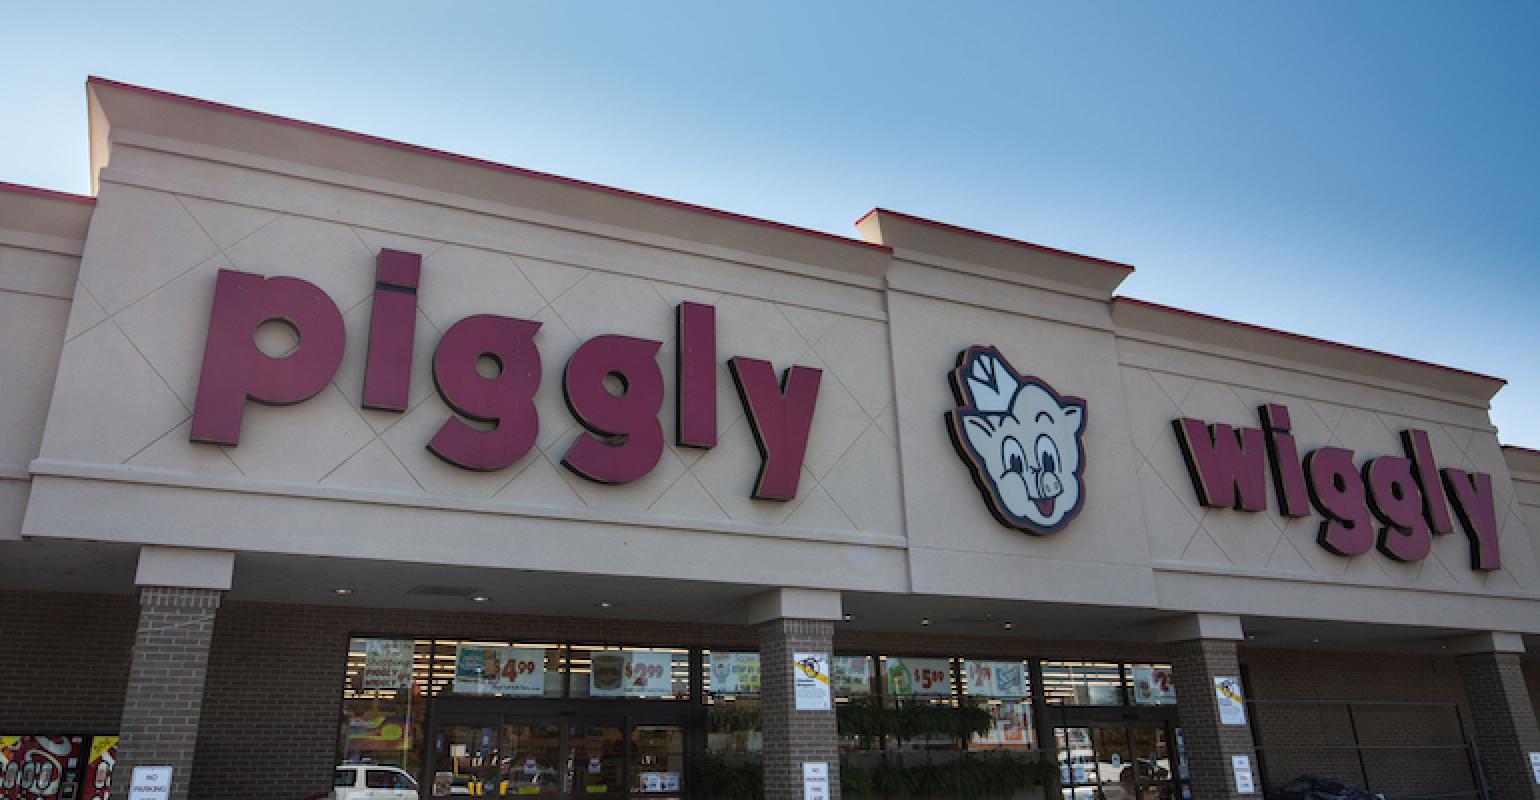 closest piggly wiggly supermarket